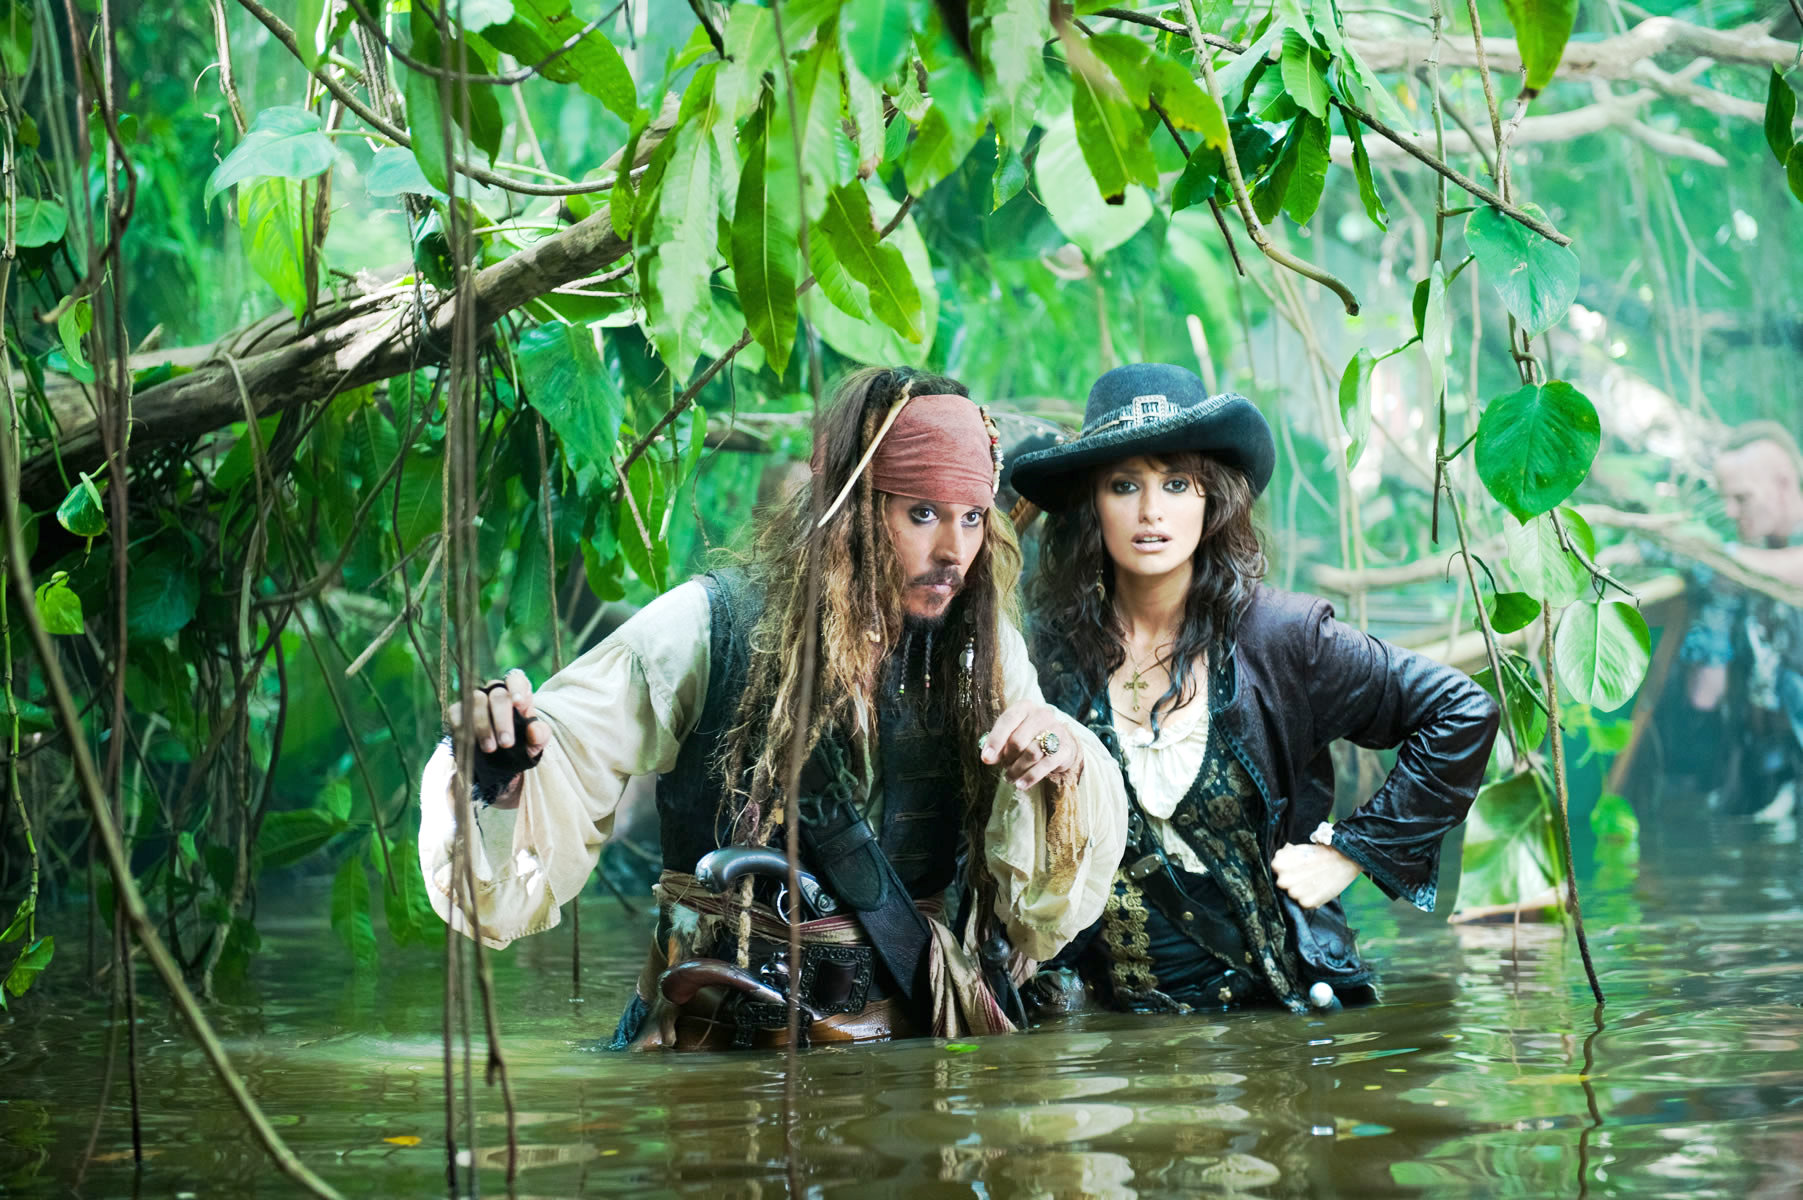 Johnny Depp stars as Jack Sparrow and Penelope Cruz stars as Angelica in Walt Disney Pictures' Pirates of the Caribbean: On Stranger Tides (2011)